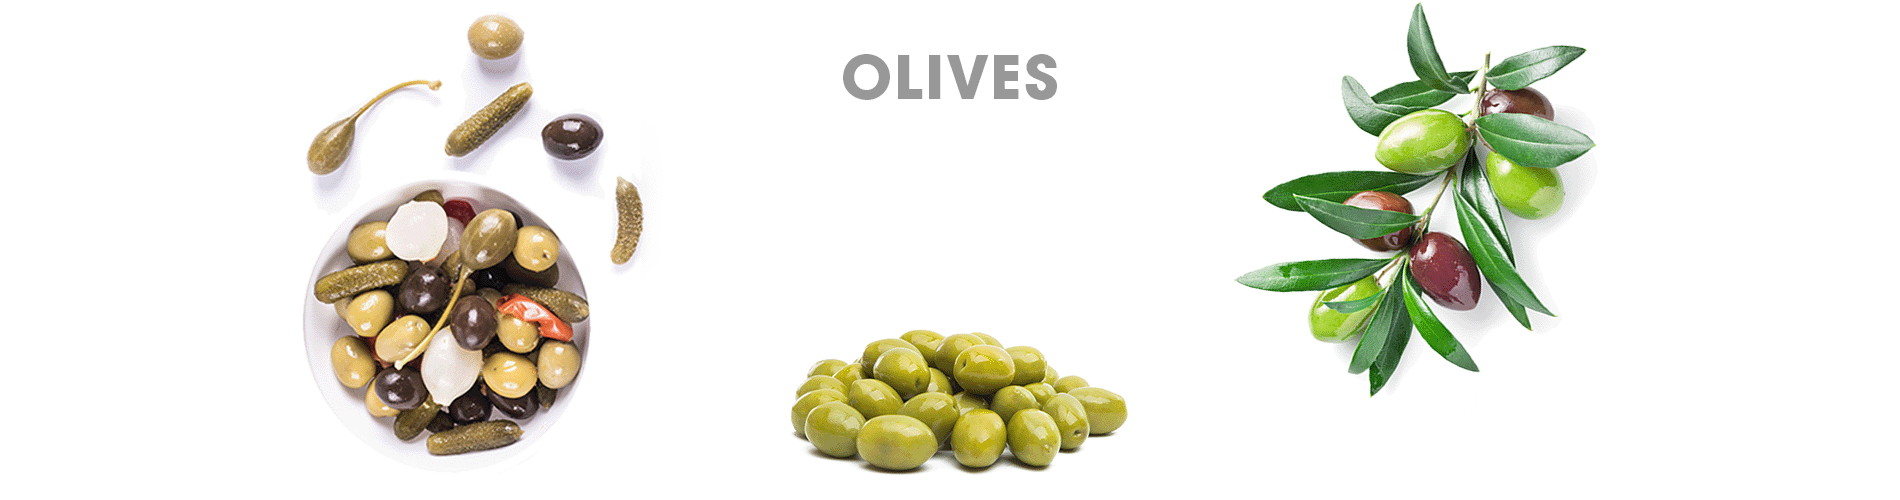 Category - Olives 1900x500-1